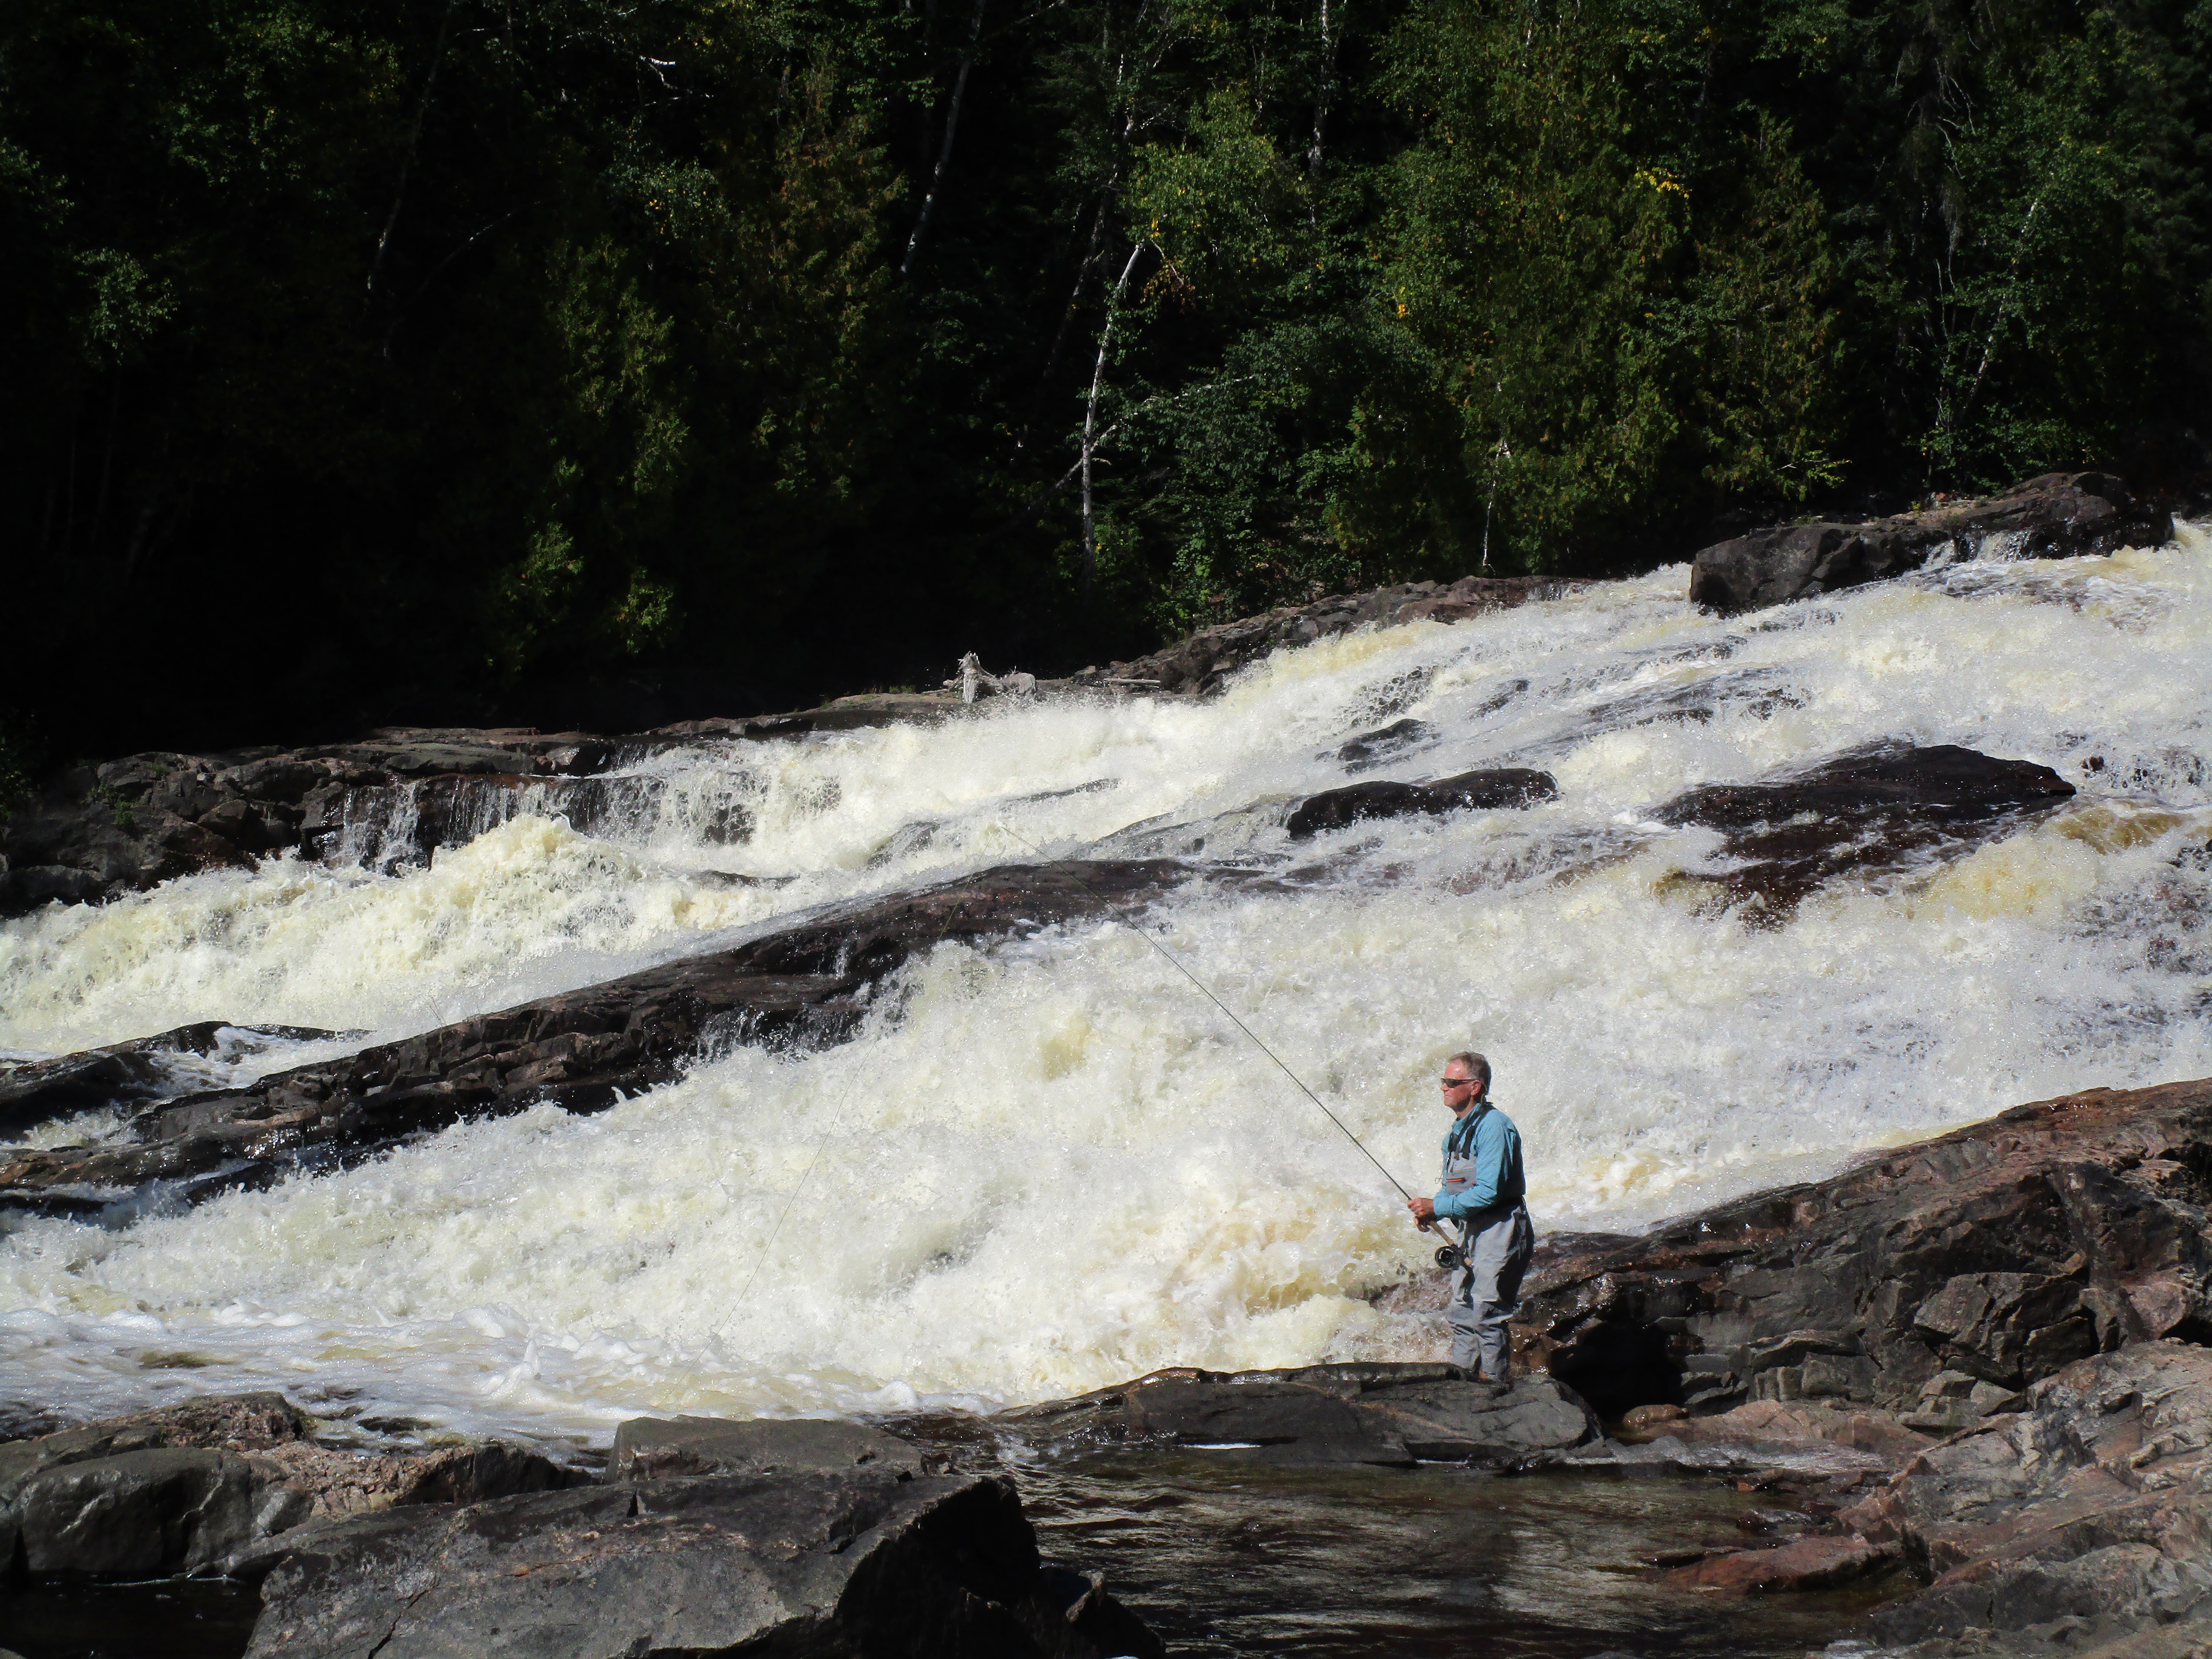 Dan Johnson makes a cast in a scenic Lake Superior tributary, while fishing for brook trout. | SHAWN PERICH